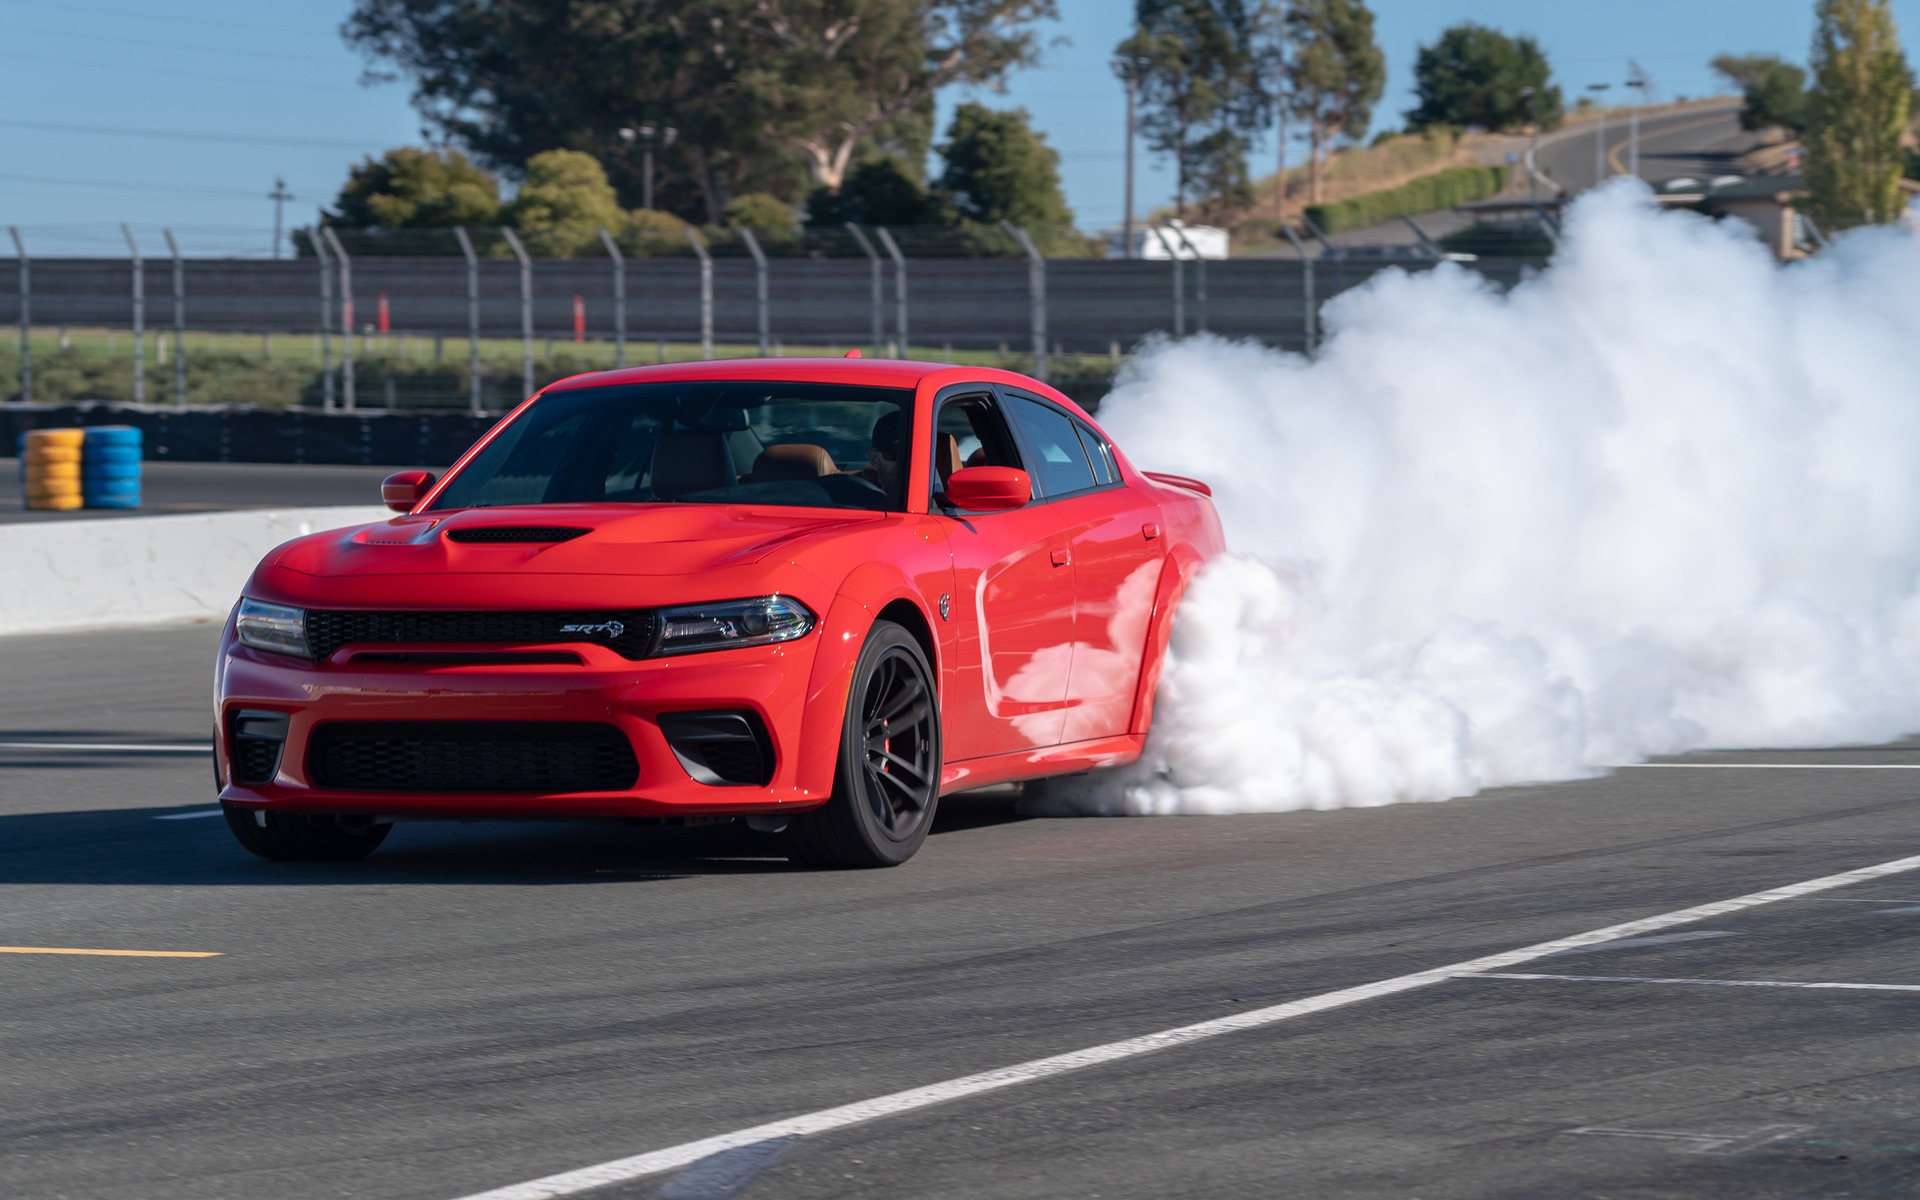 2020 Dodge Charger Hellcat Widebody: The Survivor - The Car Guide